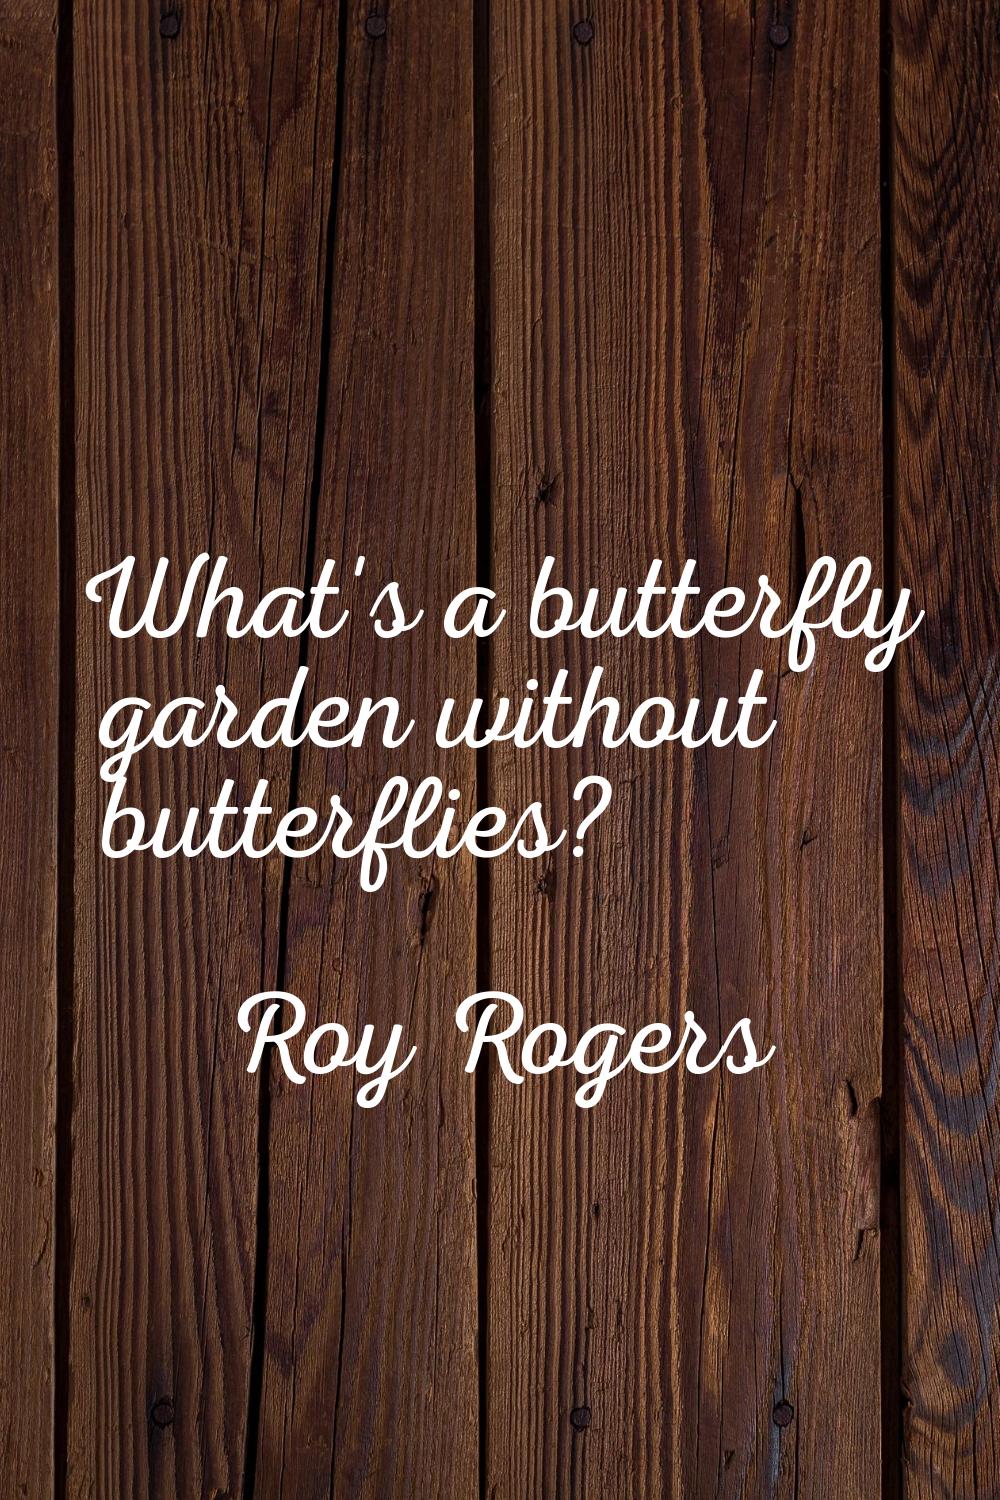 What's a butterfly garden without butterflies?